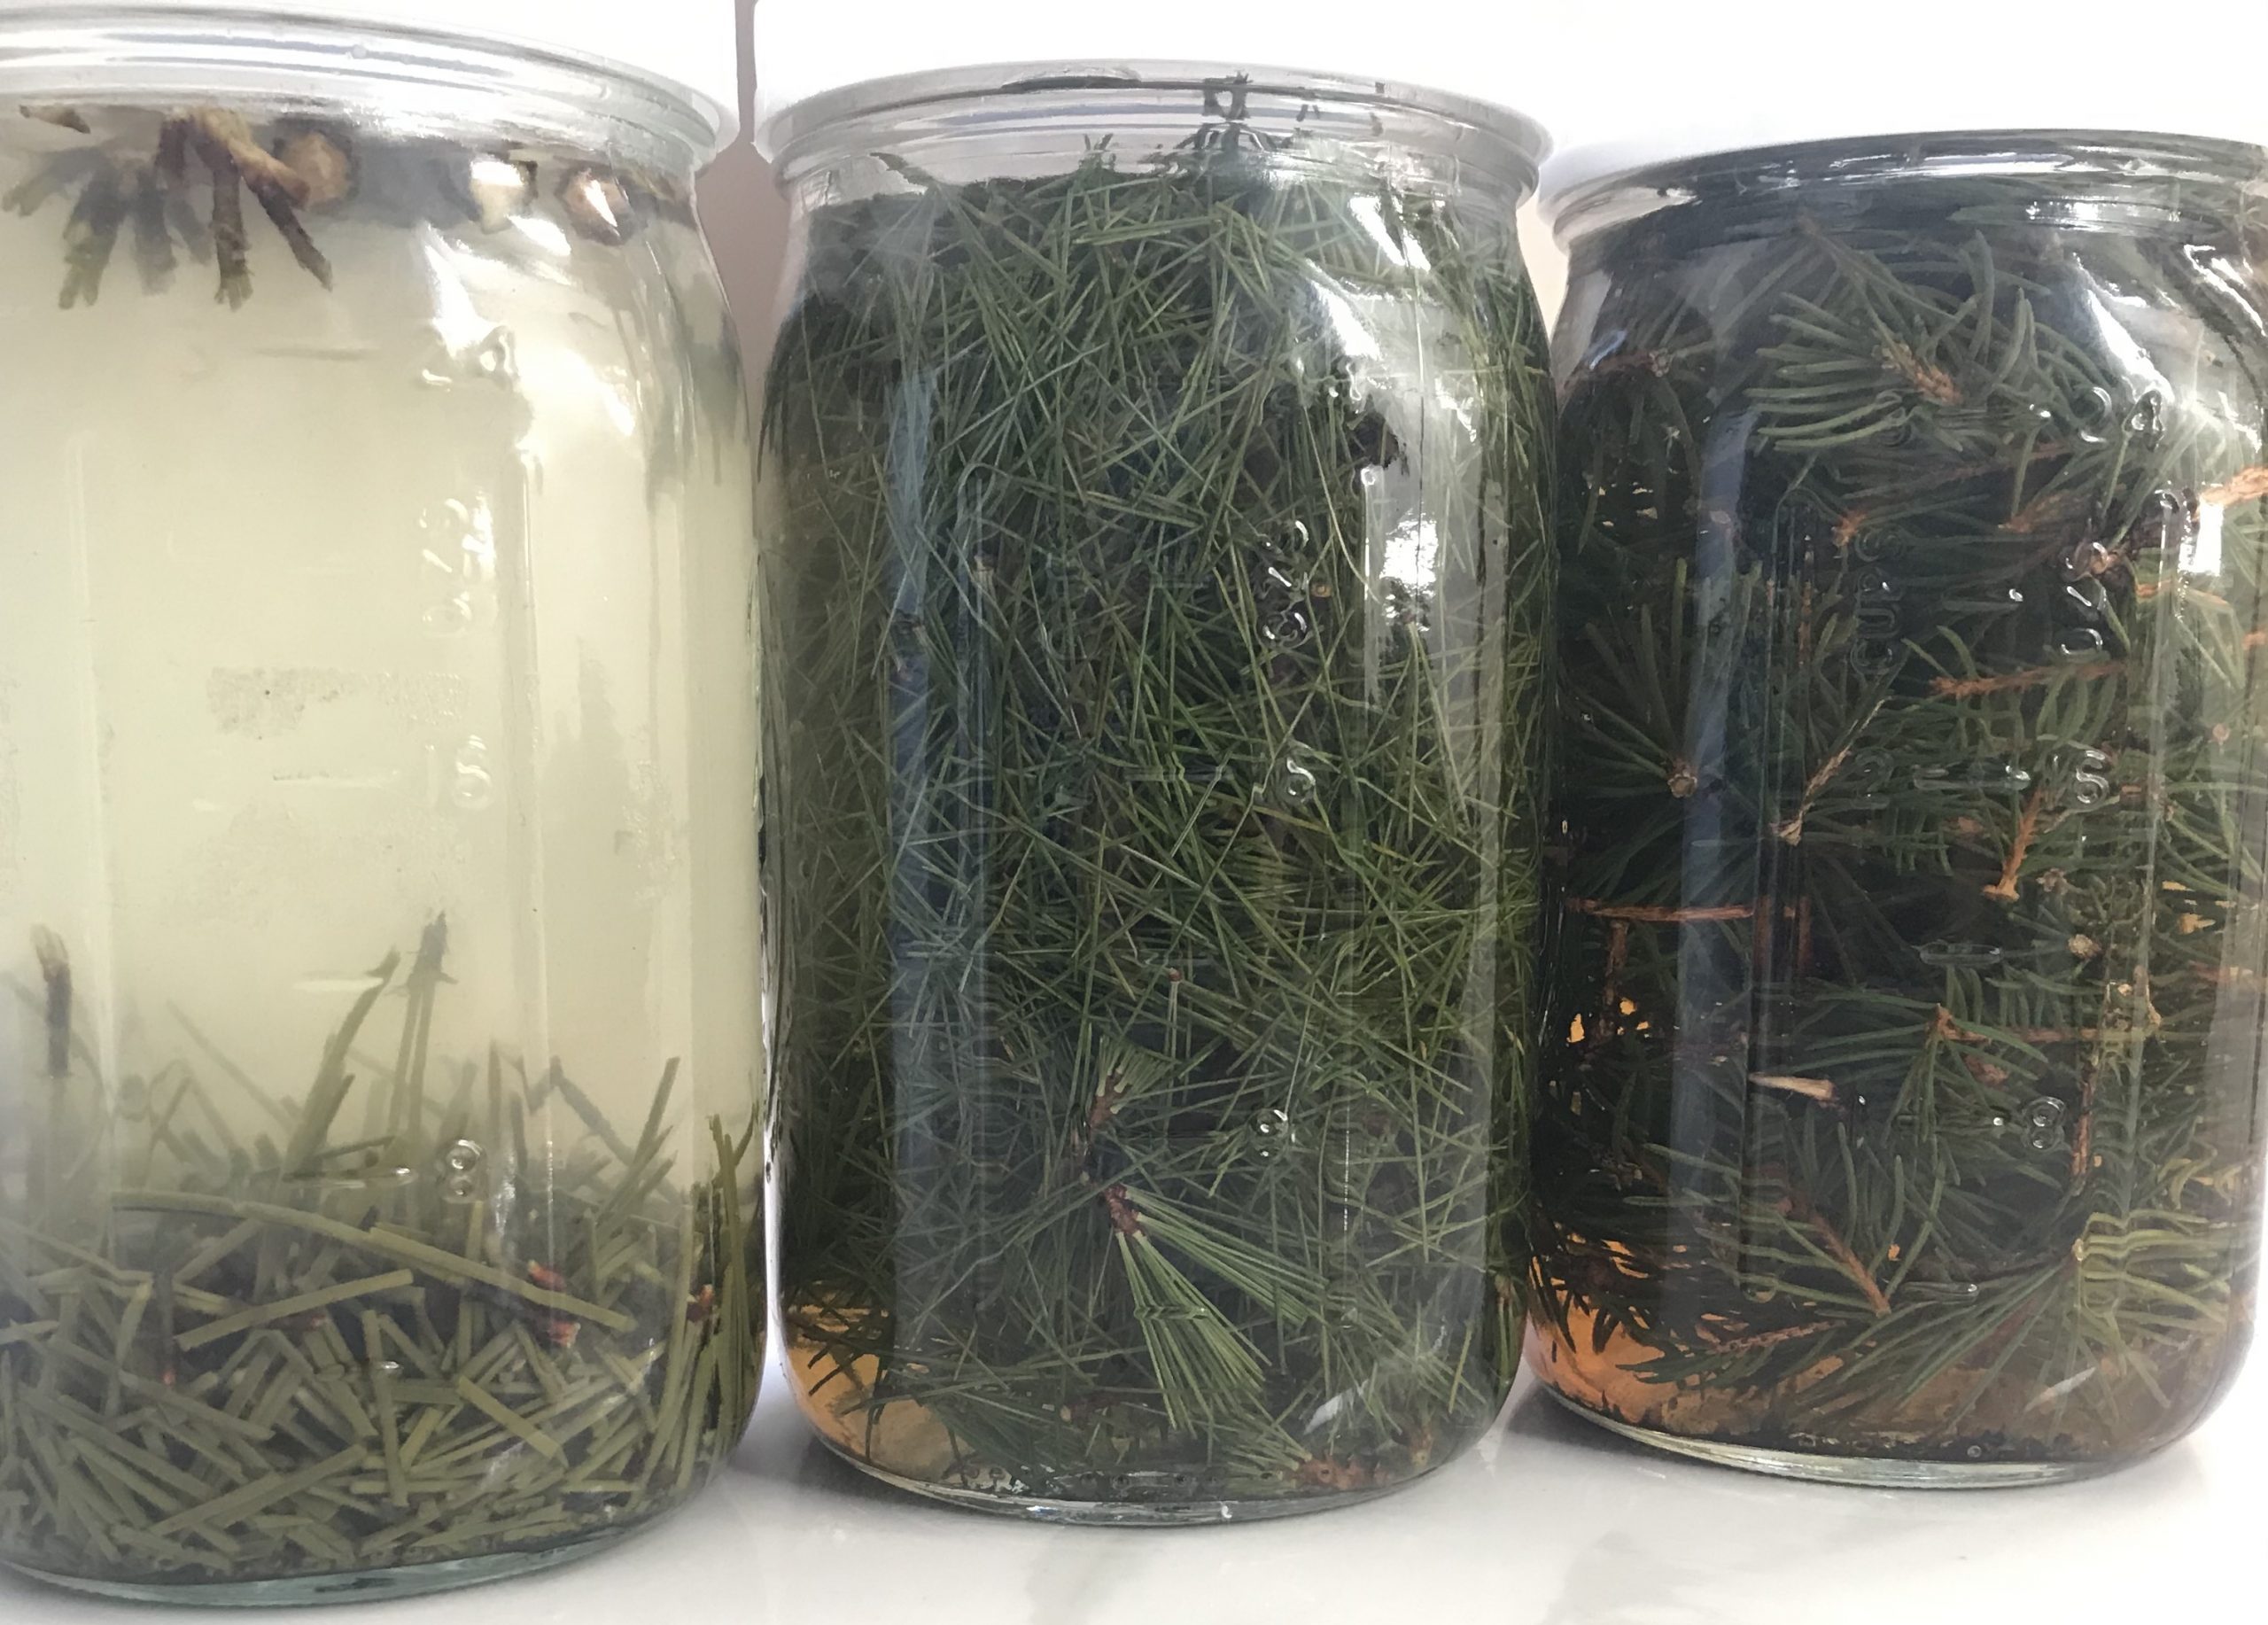 Extractions from different types of pine trees